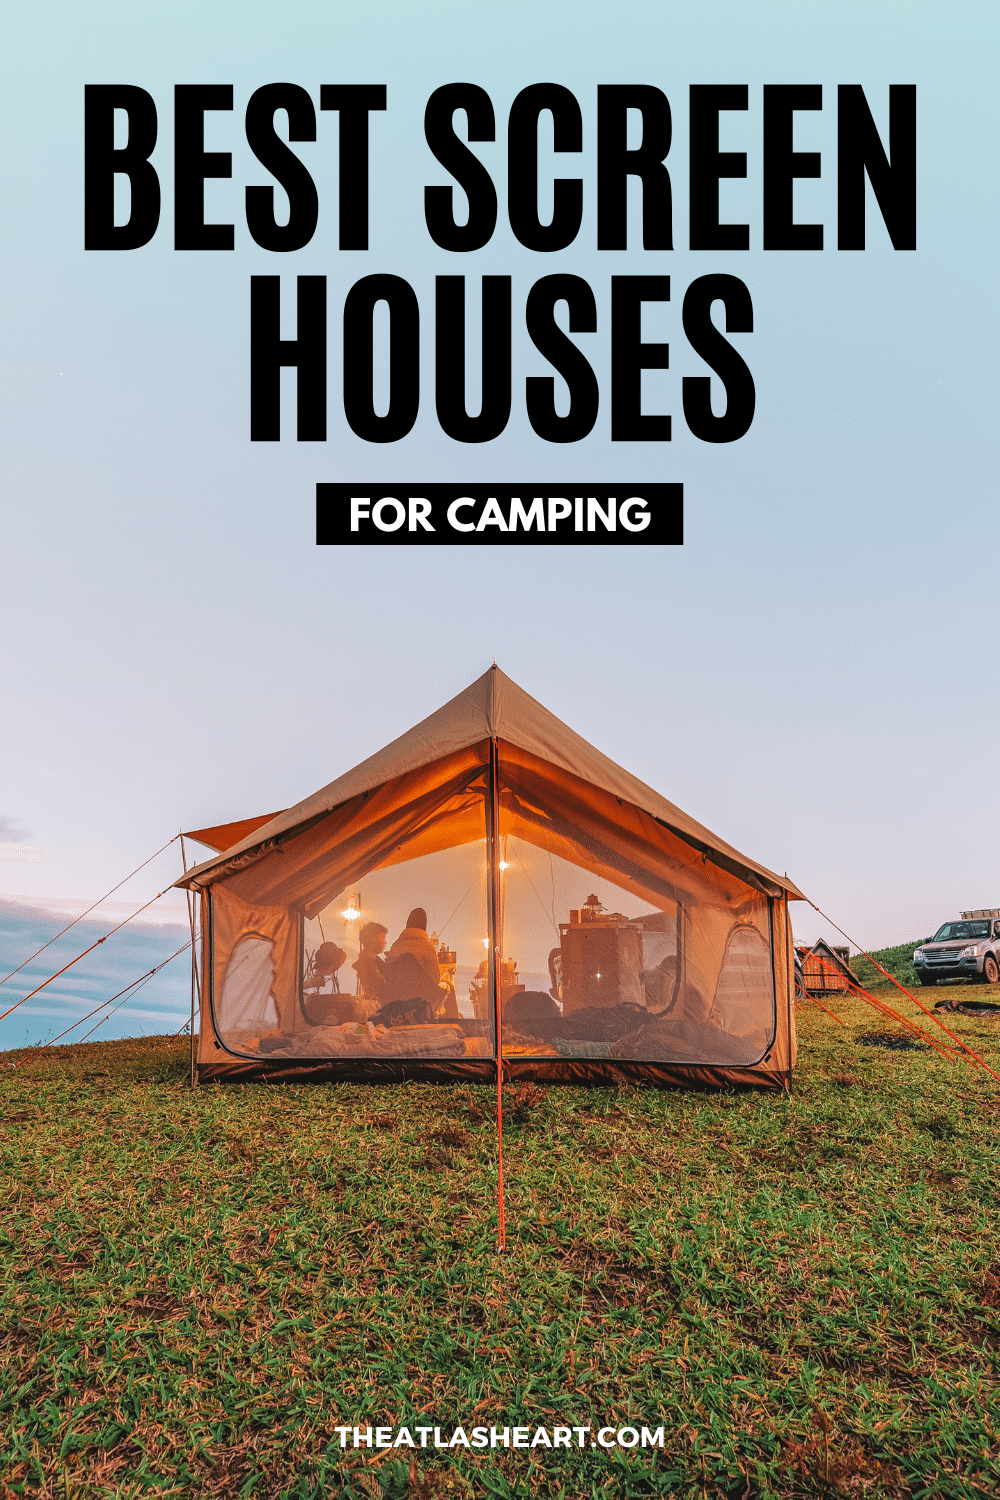 13 Best Screen Houses for Camping in 2022 (Enjoy a Bug-Free Trip)